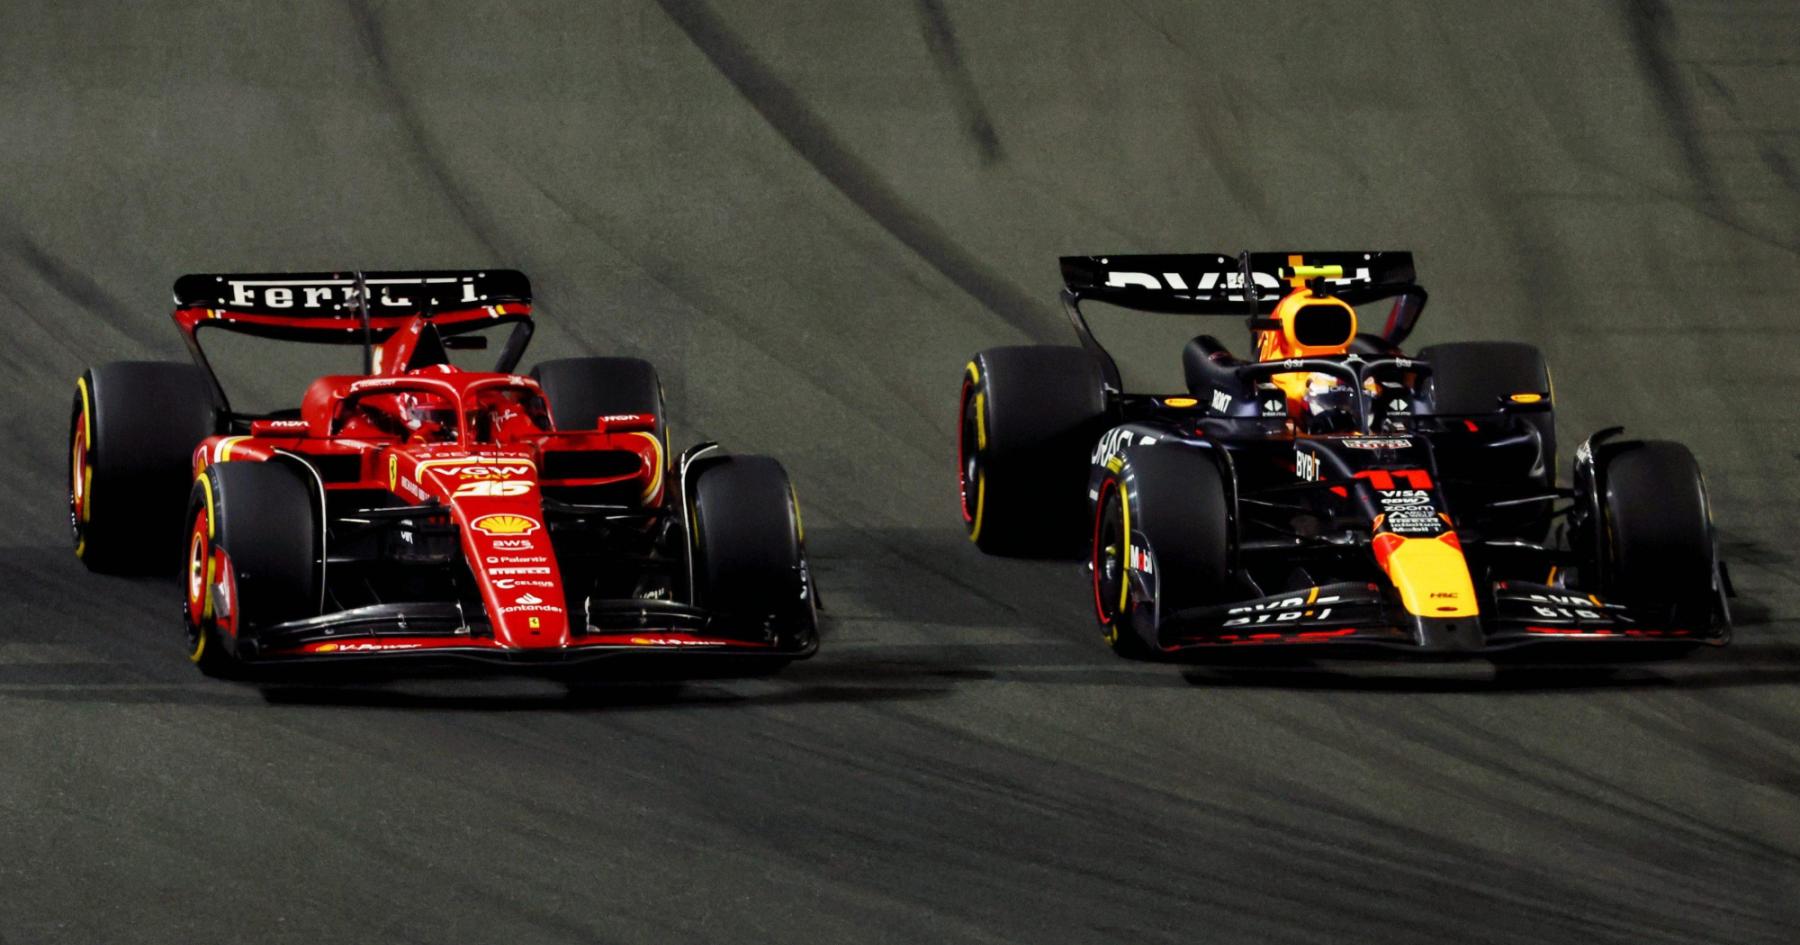 Revving Rivalries: Ferrari Fires Up Fierce Competition with Red Bull for Australian GP Showdown